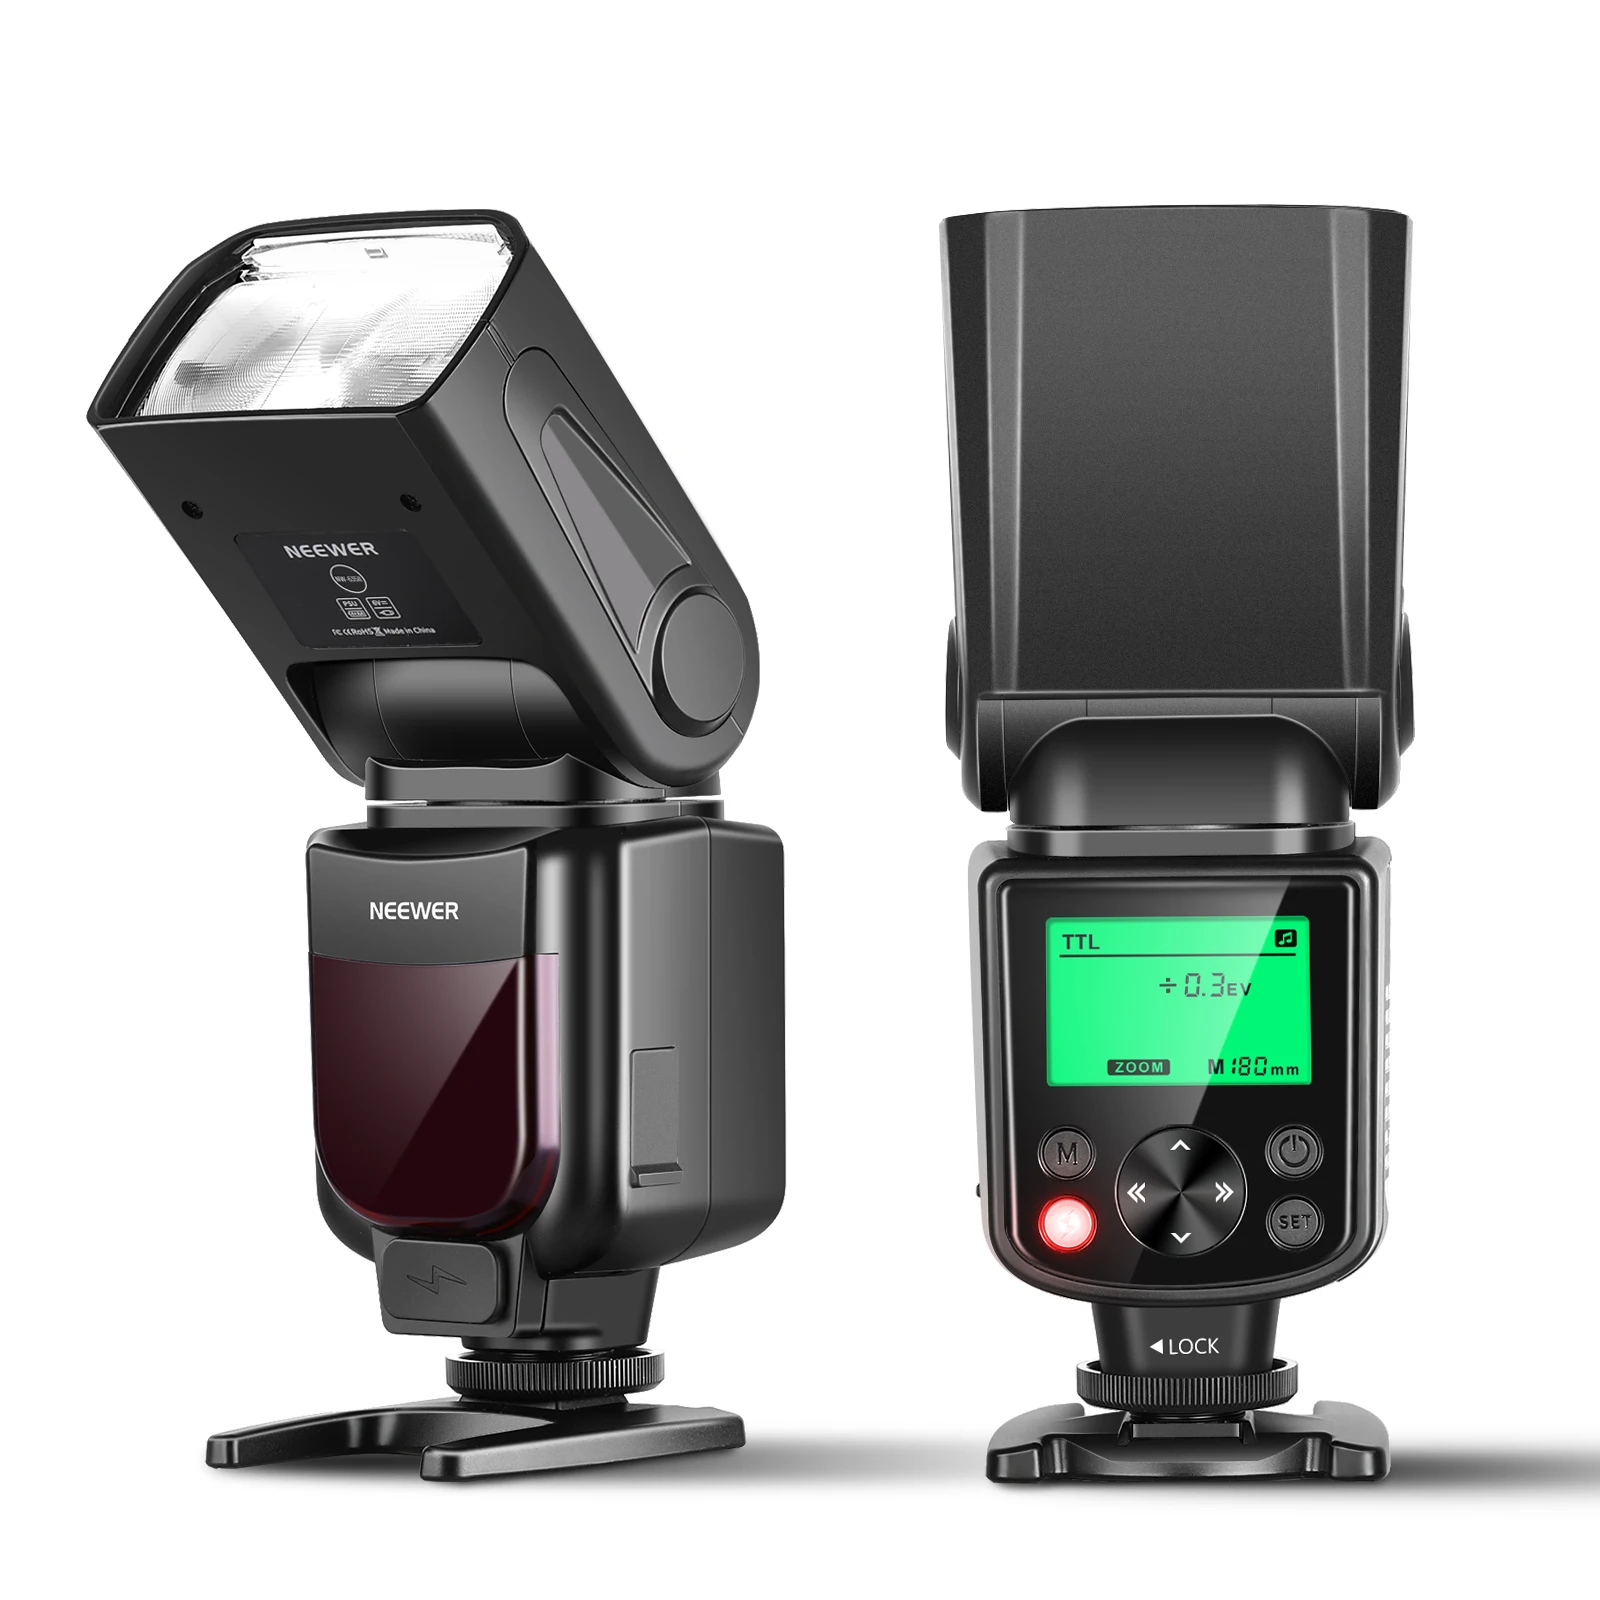 

NEEWER Upgraded NW635II-C TTL Camera Flash Speedlite With LCD Screen, Compatible With Canon EOS R6 R5 R3 R M6 850D 800D 760D